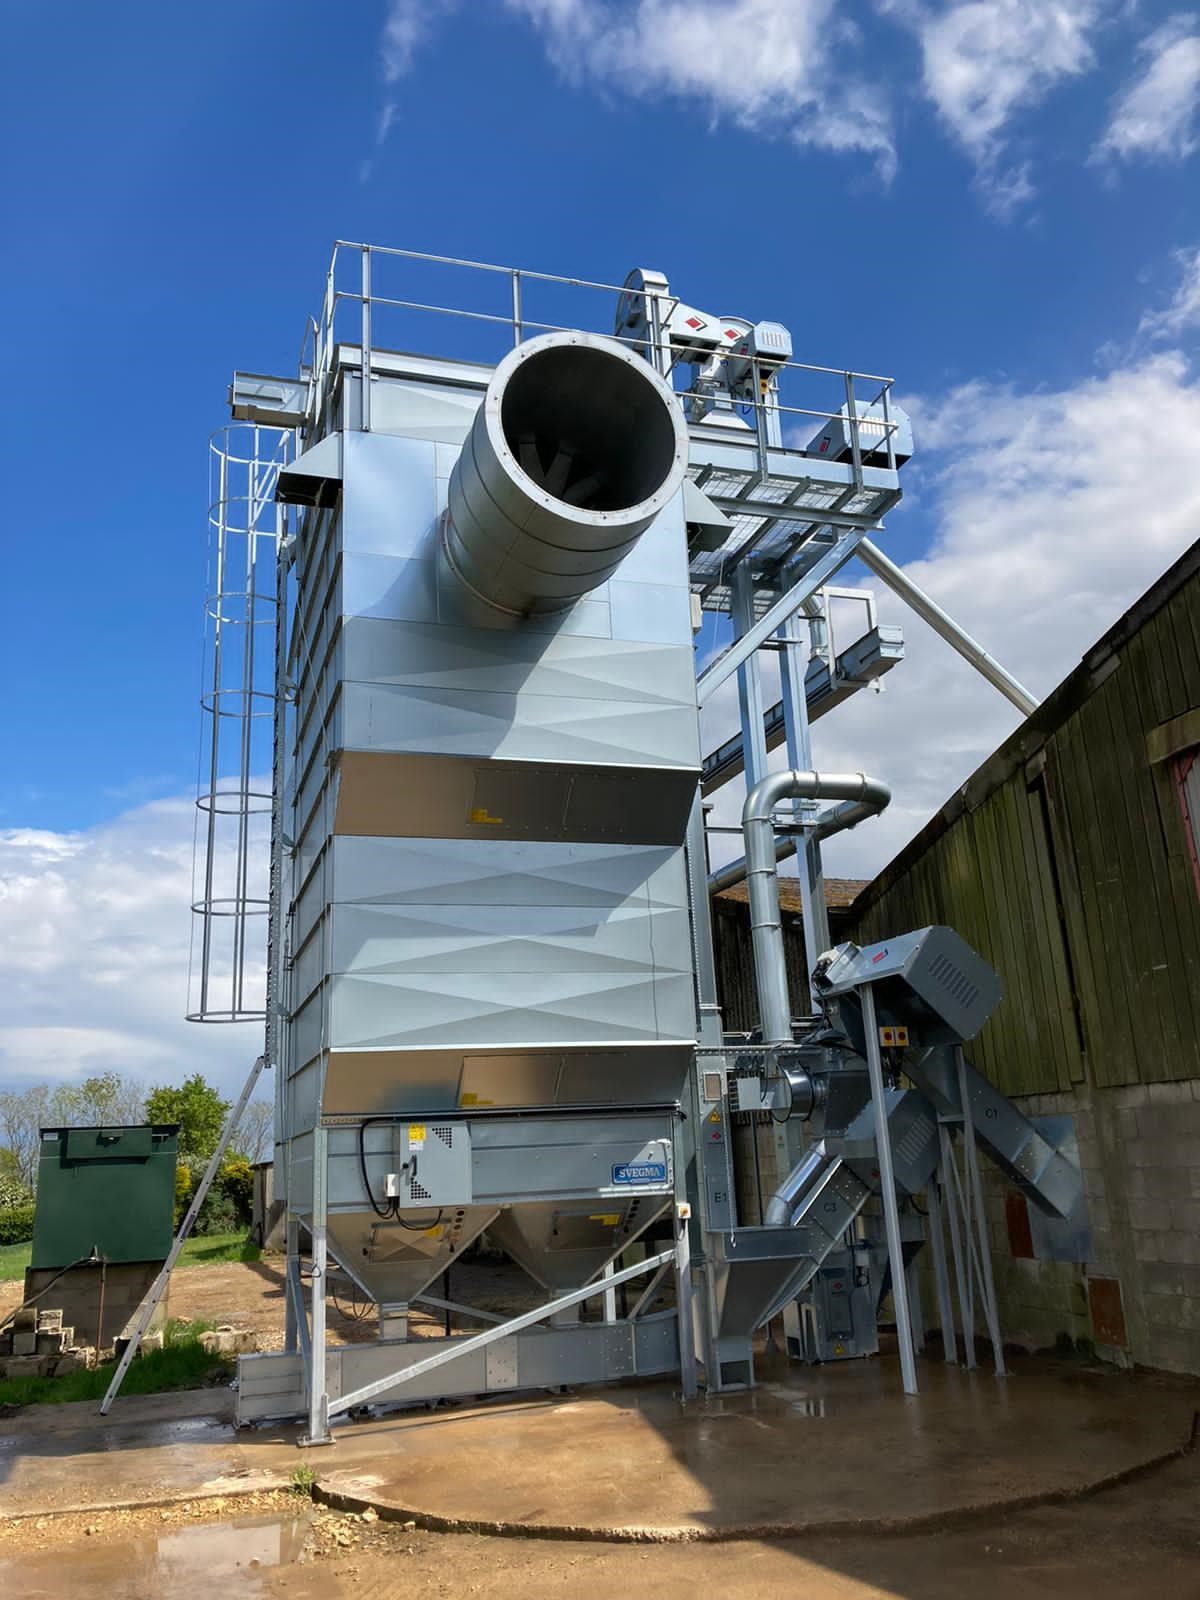 BDC Systems and McArthur Agriculture continue to deliver cost-effective, future-proofed grain drying and handling solutions to improve productivity and efficiency